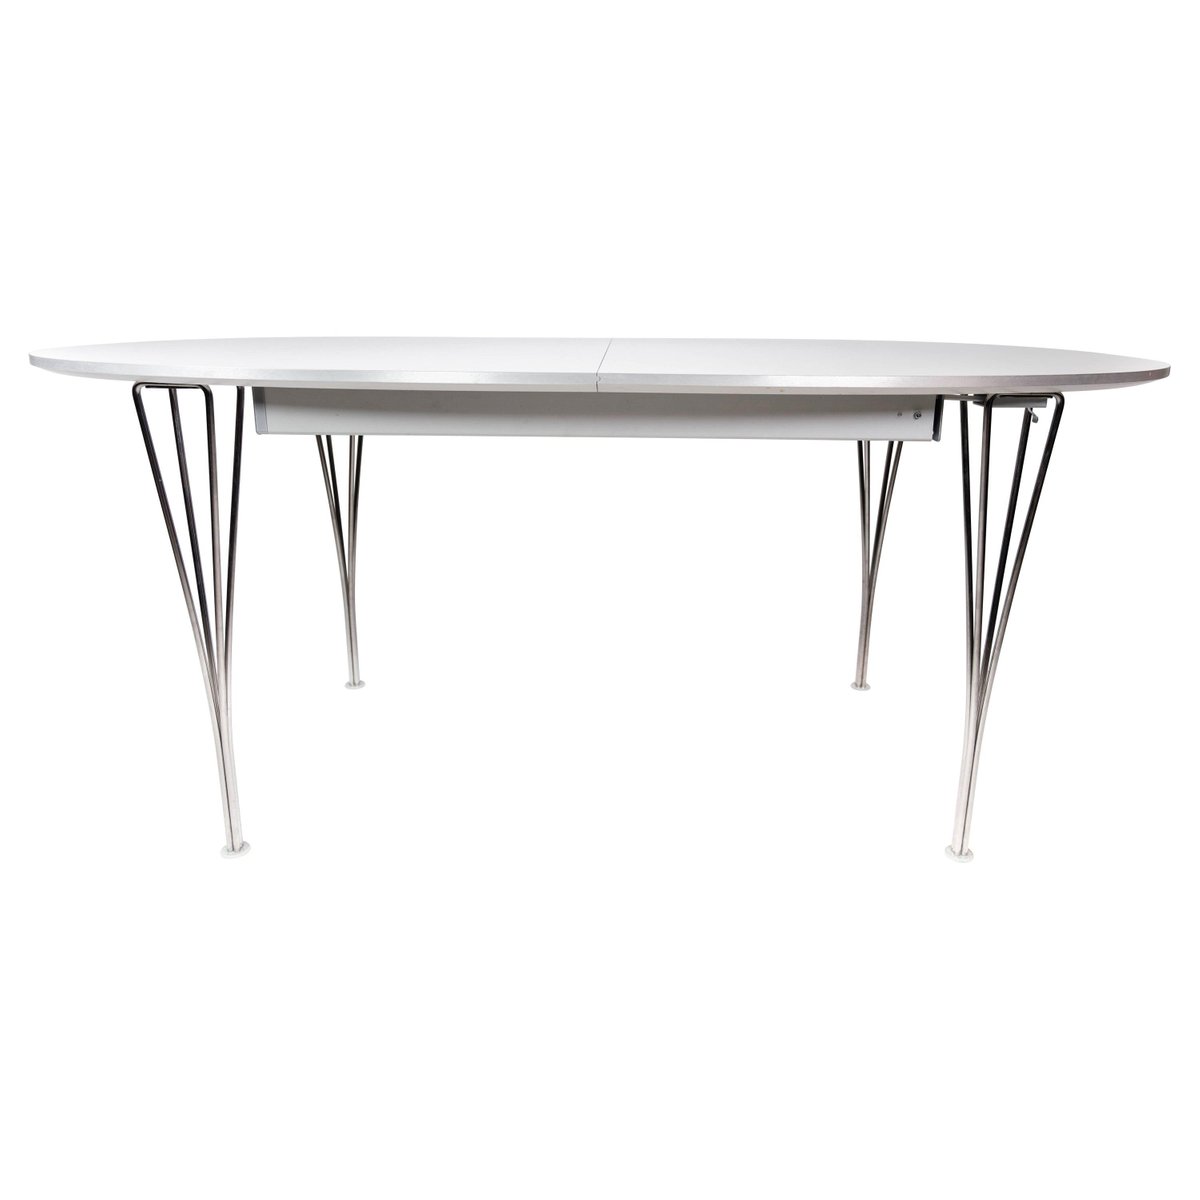 ellipse dining table with white laminate by piet hein for fritz hansen UY-1000726